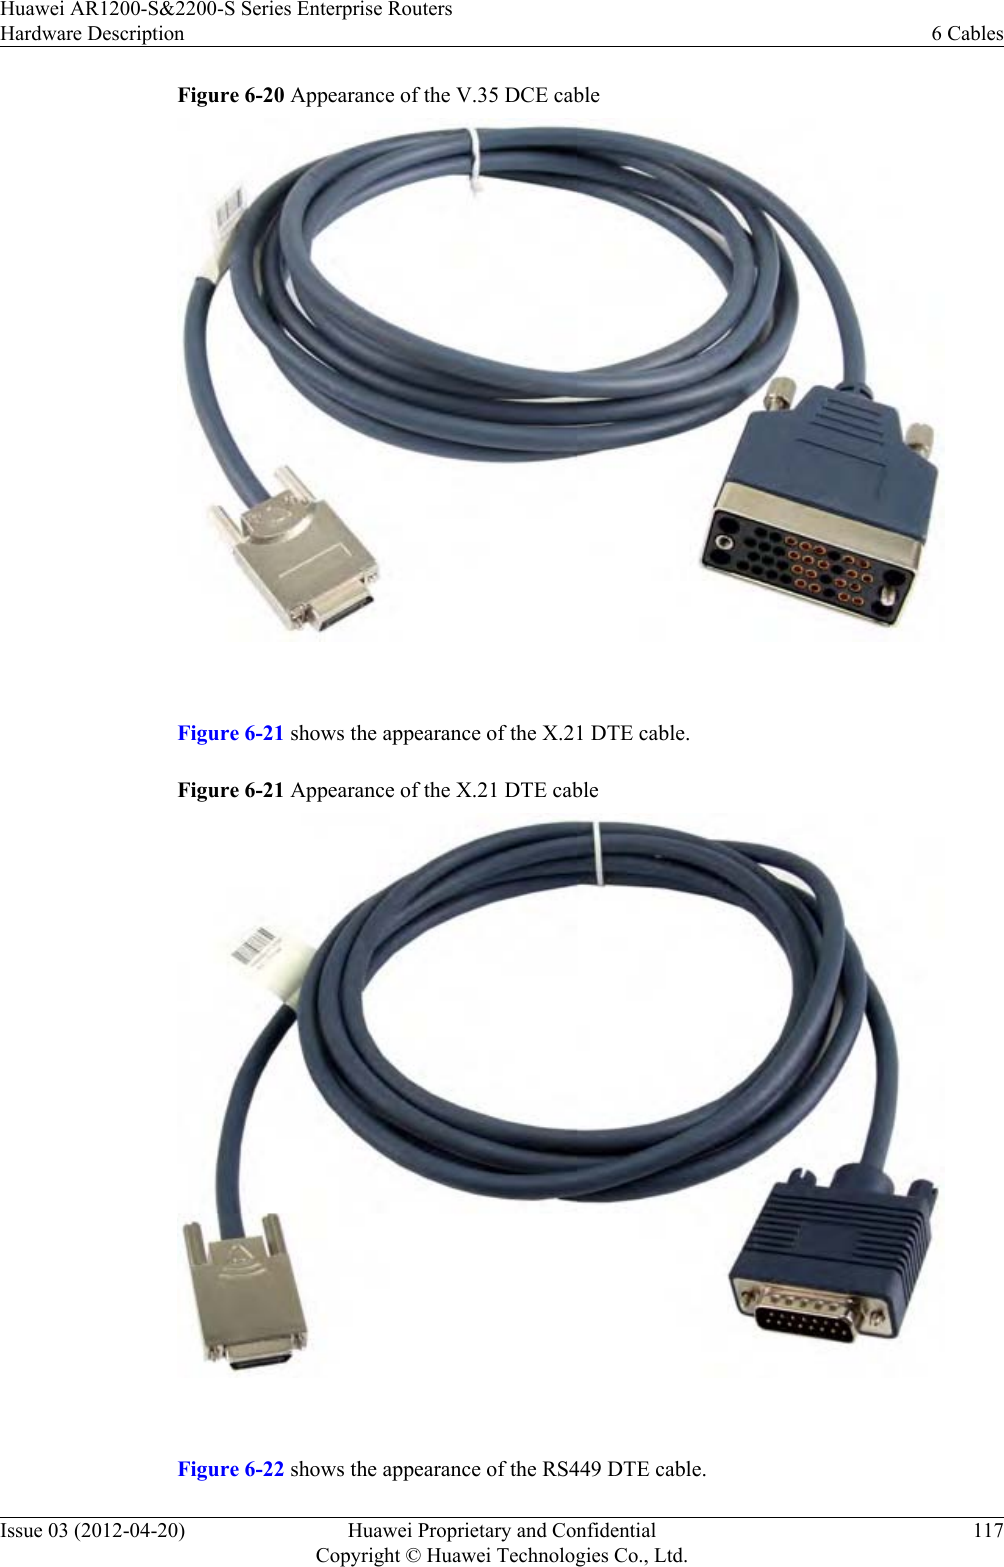 Figure 6-20 Appearance of the V.35 DCE cable Figure 6-21 shows the appearance of the X.21 DTE cable.Figure 6-21 Appearance of the X.21 DTE cable Figure 6-22 shows the appearance of the RS449 DTE cable.Huawei AR1200-S&amp;2200-S Series Enterprise RoutersHardware Description 6 CablesIssue 03 (2012-04-20) Huawei Proprietary and ConfidentialCopyright © Huawei Technologies Co., Ltd.117